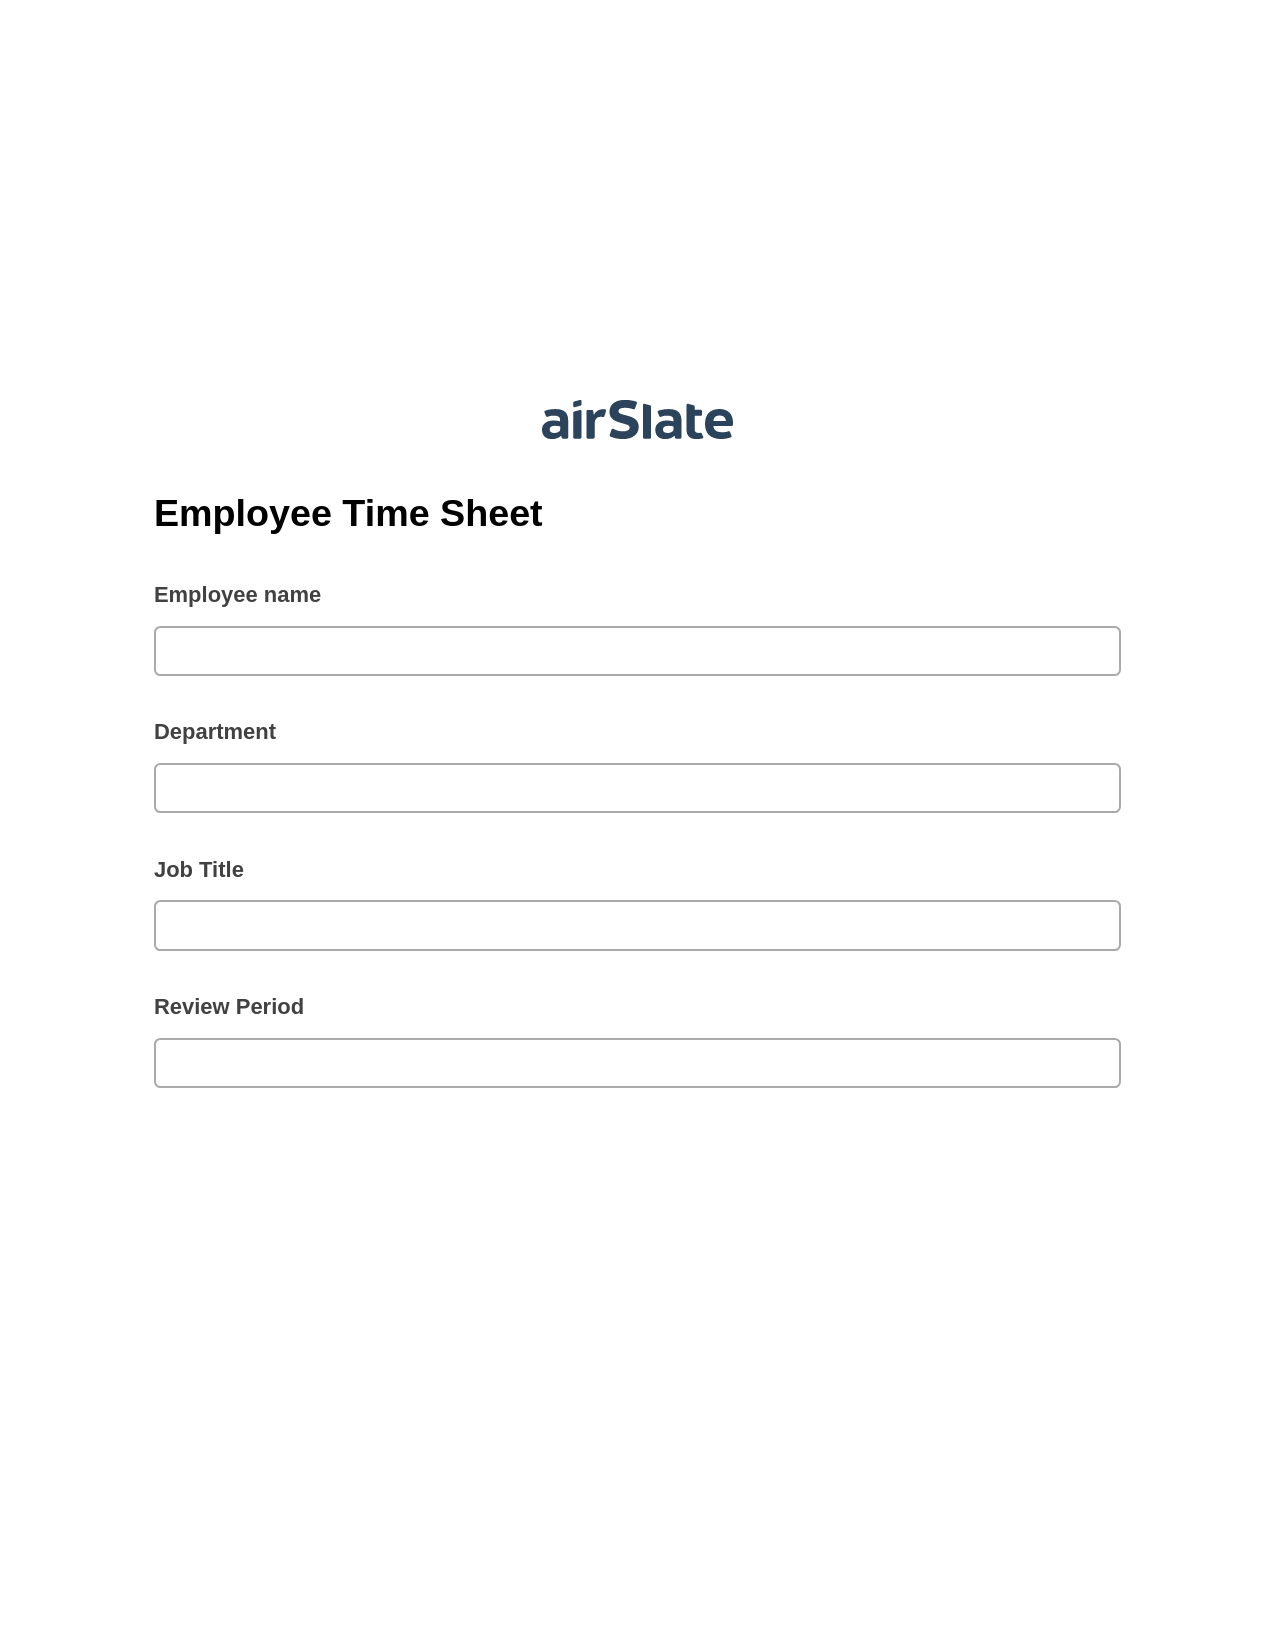 Employee Time Sheet Pre-fill from Litmos bot, Update Audit Trail Bot, Archive to SharePoint Folder Bot